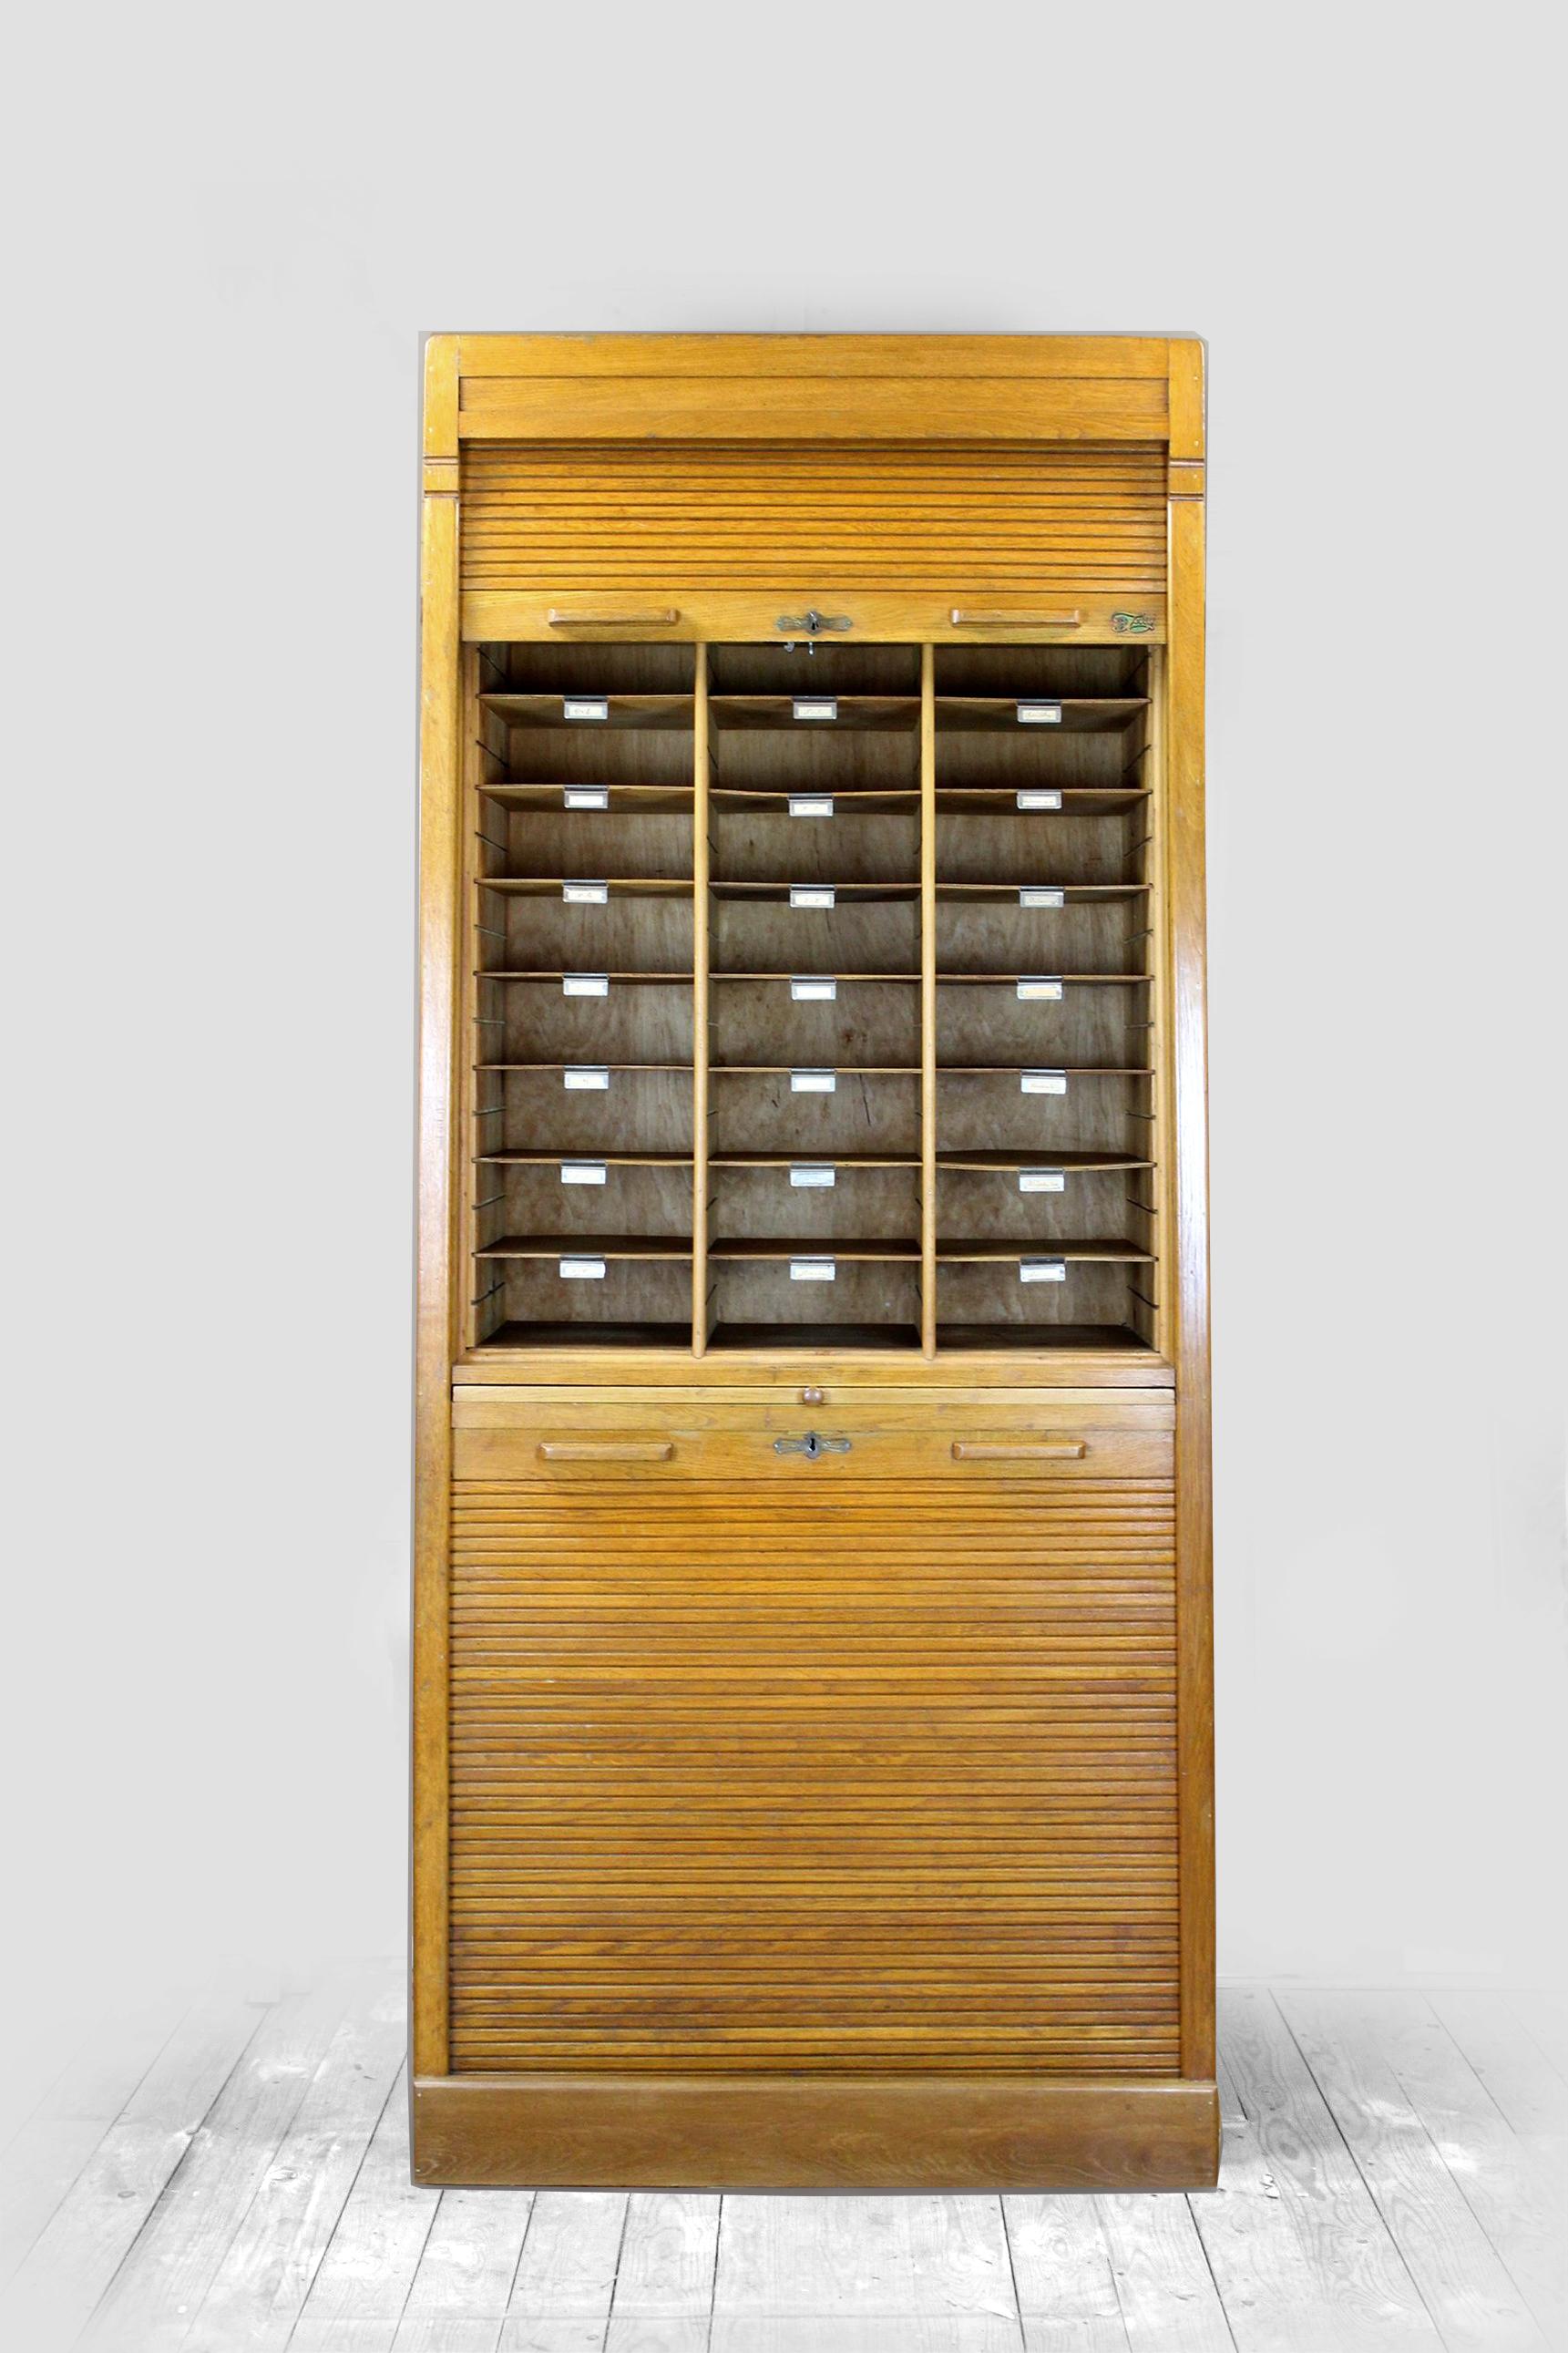 This oak filing cabinet was produced in the 1930s in the USA by the Jerry company. 
The cabinet has two roller shutters and a sliding shelf in the middle. 
The shutters work easily, they are locked with a key (one key included, fits both locks).